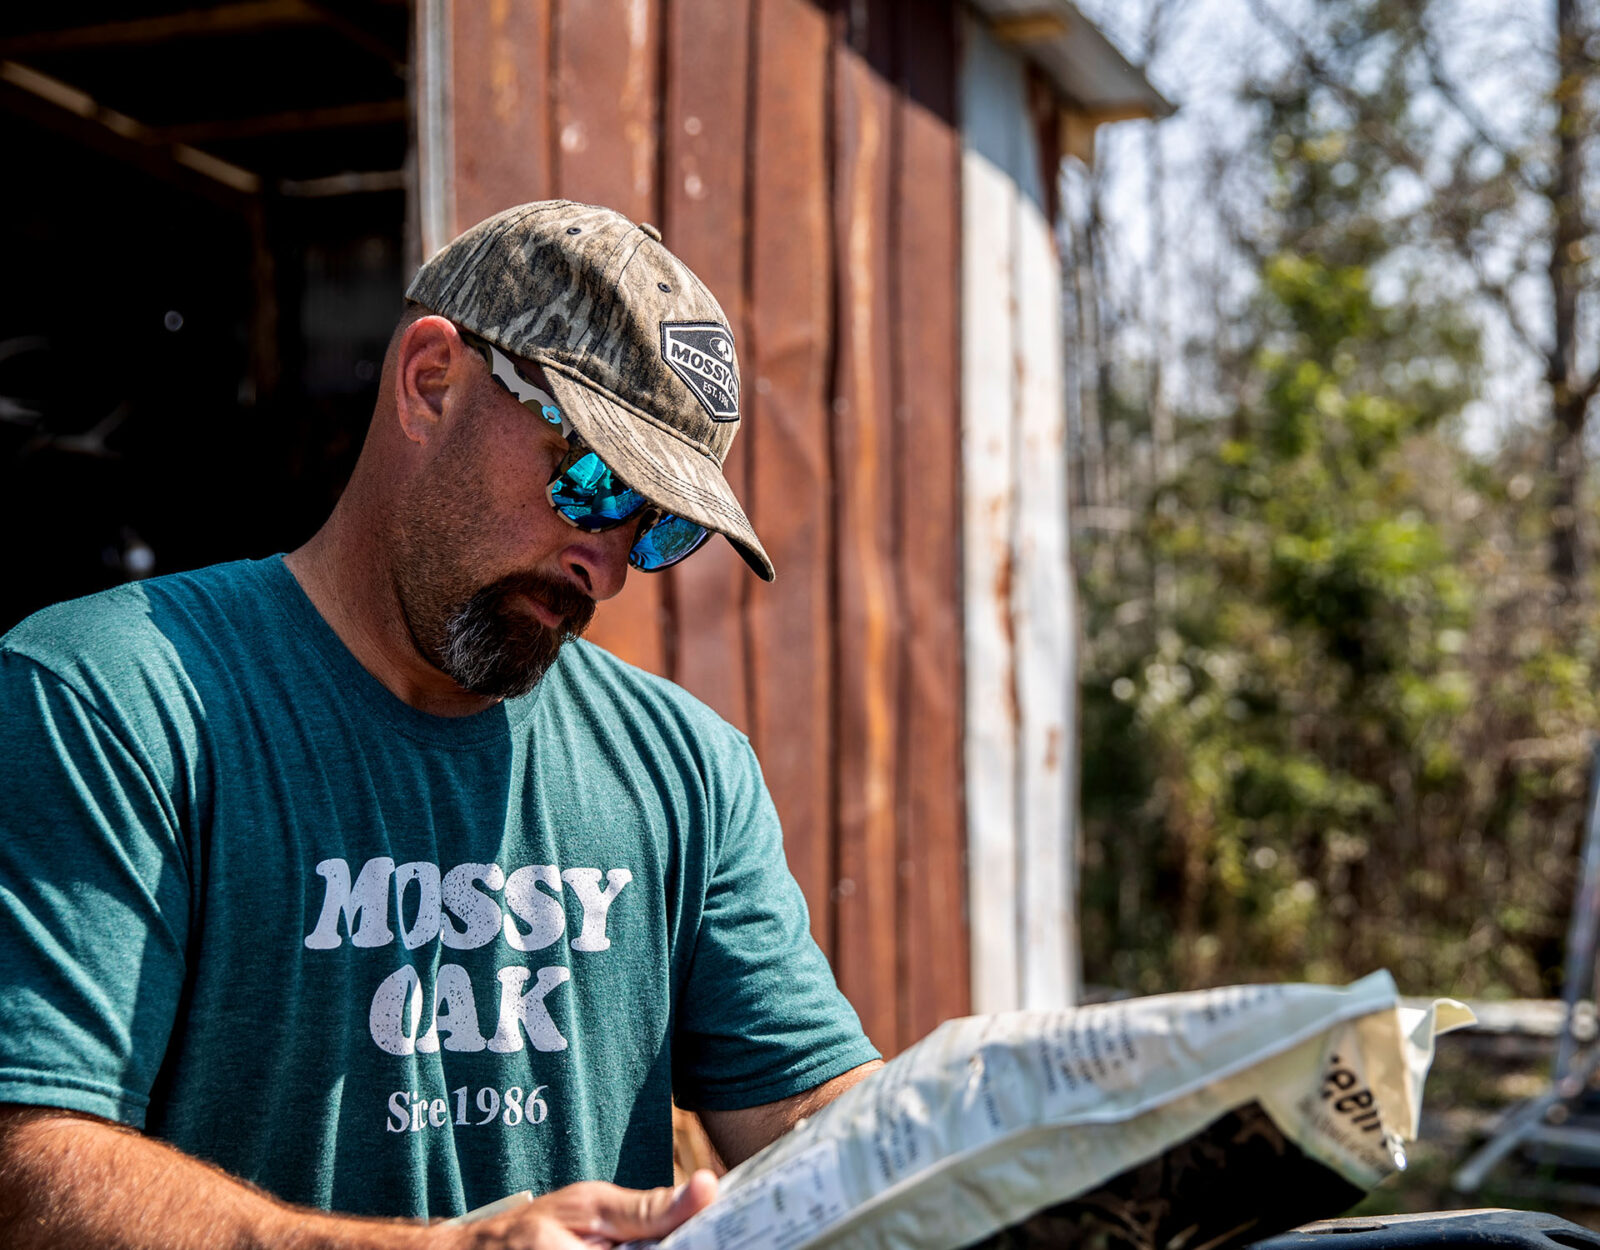 A man in a Mossy Oak tshirt reads the packaging of a seed bag. 